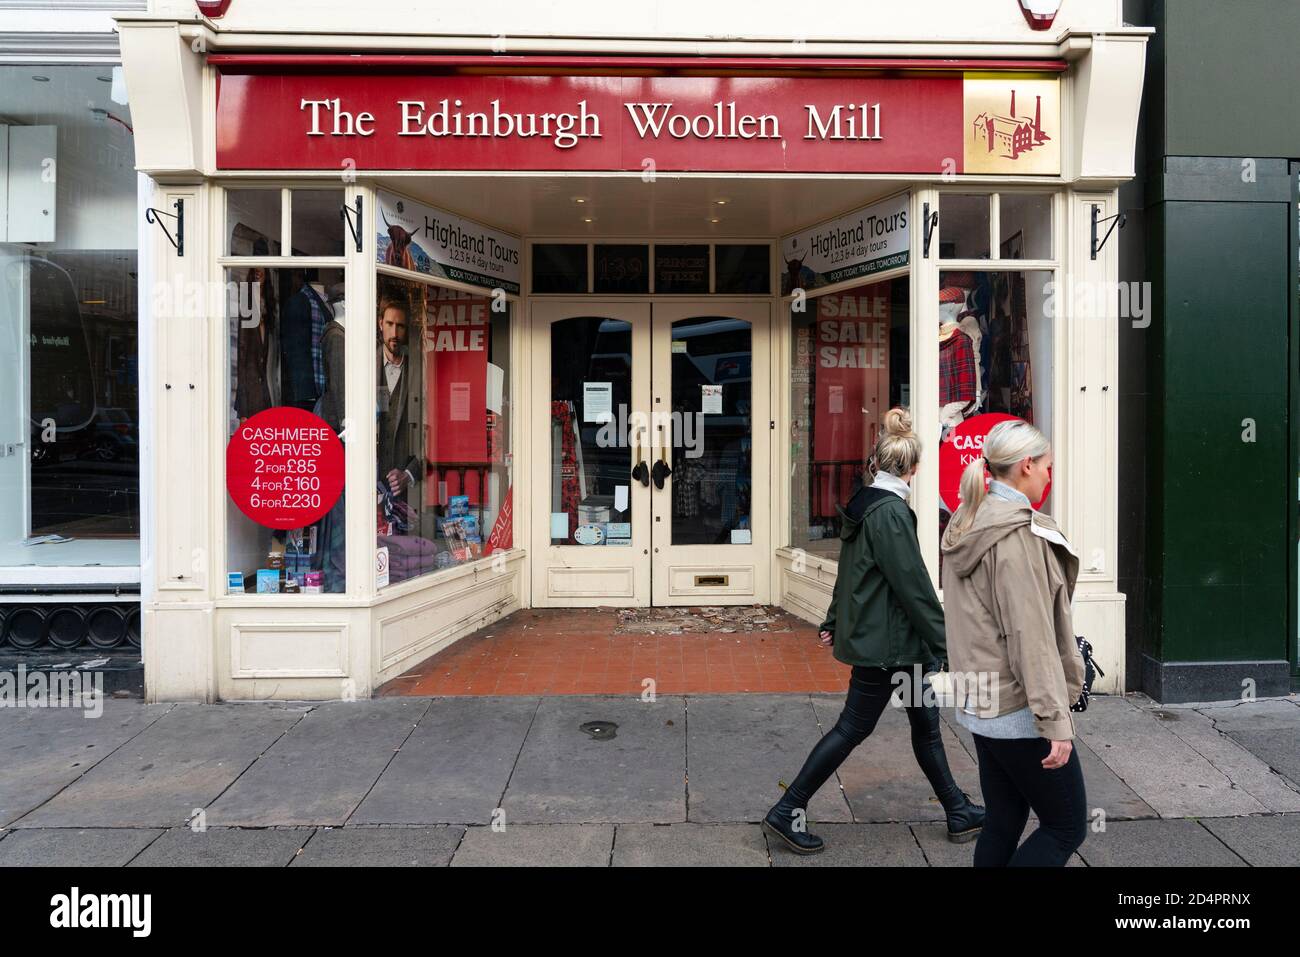 Edinburgh, Scotland, UK. 10 October 2020. Around 21,500 jobs at risk at the business which includes the Edinburgh Woollen Mill shops. Administrators are bring appointed following a slump in sales due in part to the coronavirus pandemic. Iain Masterton/Alamy Live News Stock Photo